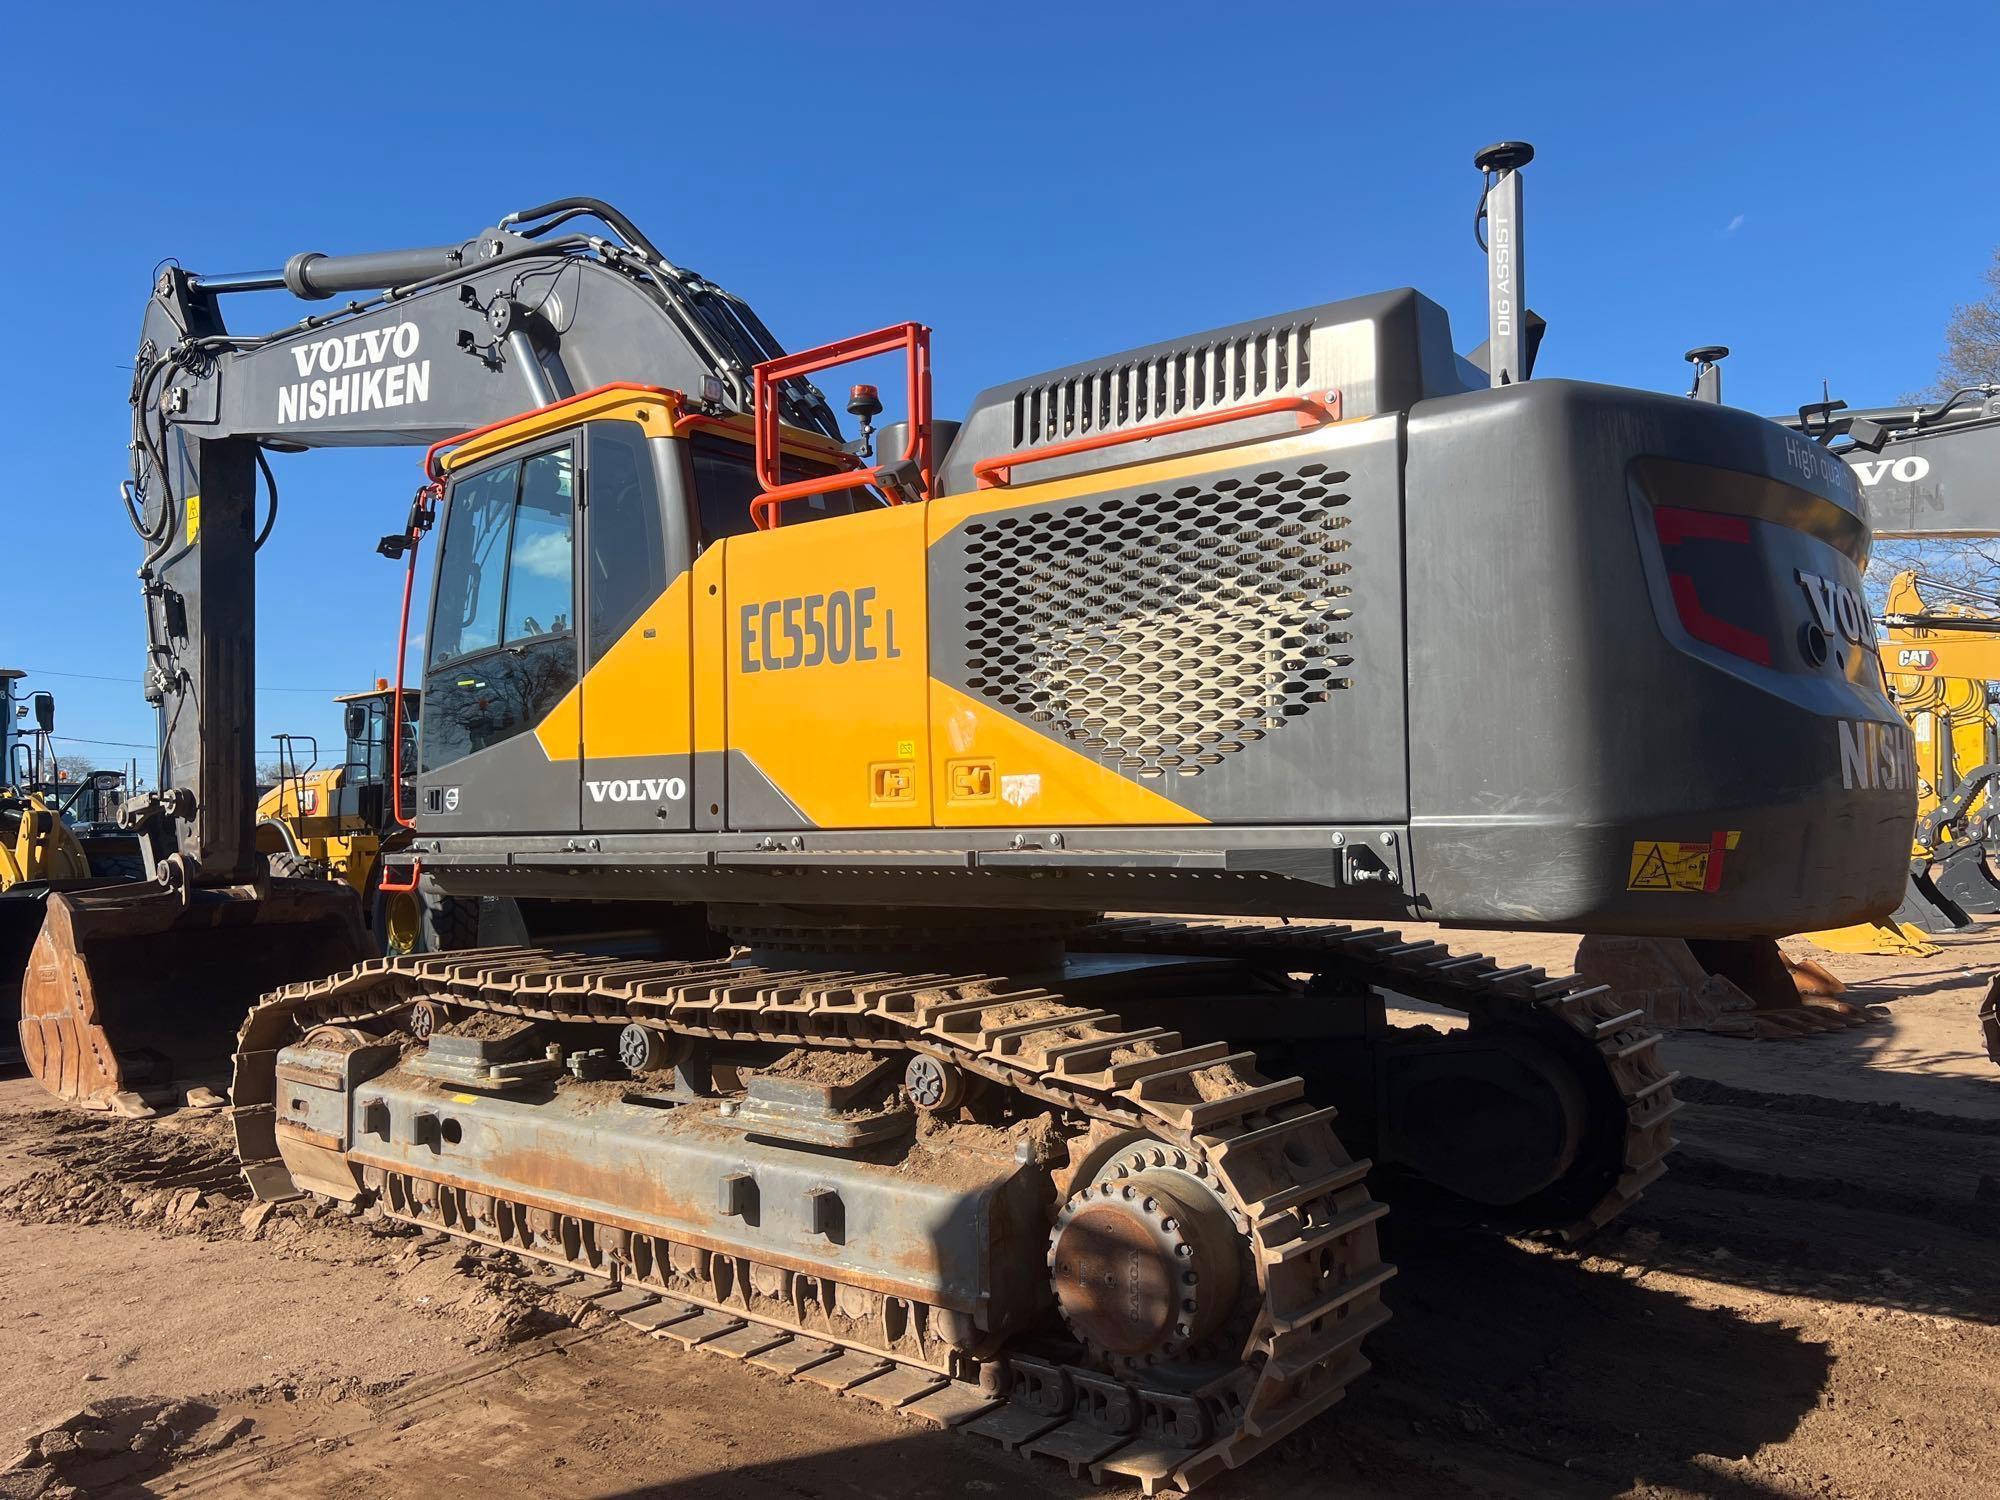 2022 VOLVO EC550EL HYDRAULIC EXCAVATOR SN-00075... ...powered by diesel engine, equipped with Cab, a